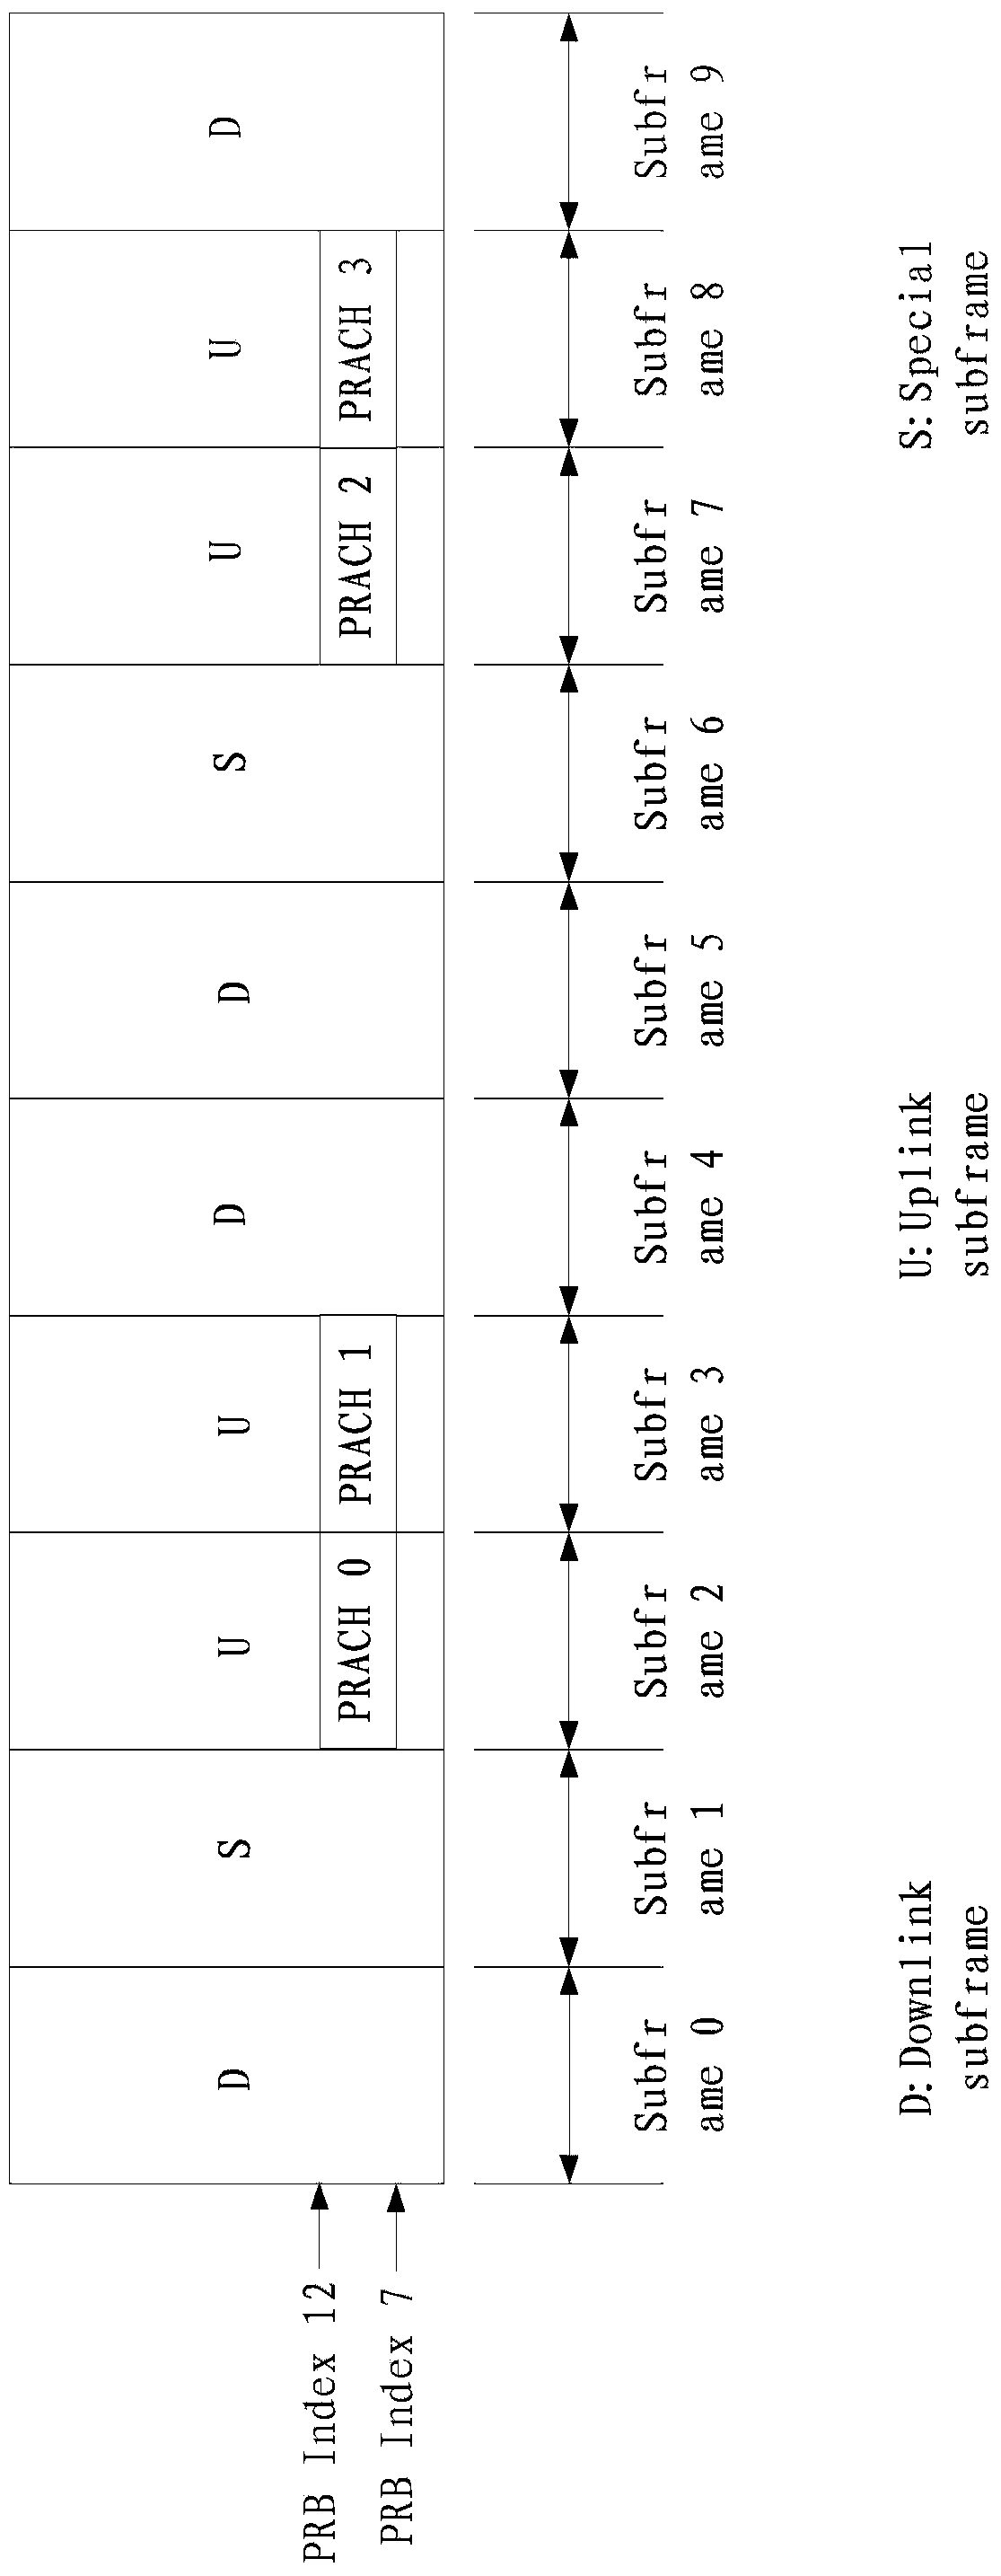 Random access sequence transmission method and device